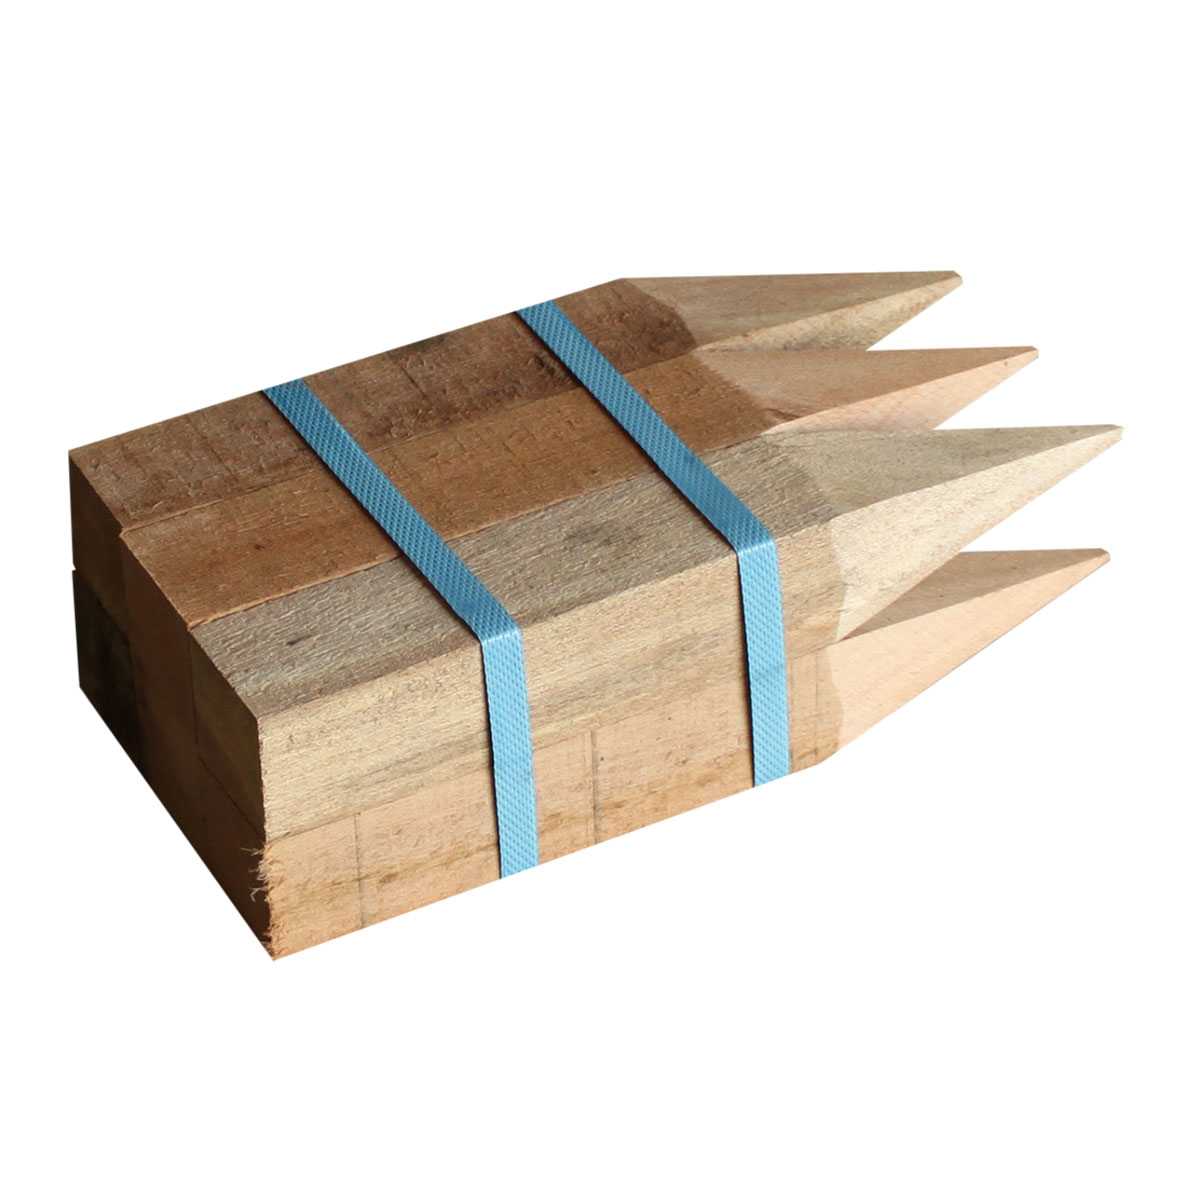 Hardwood Stakes 50 x 50 x 375mm - 6 Pack